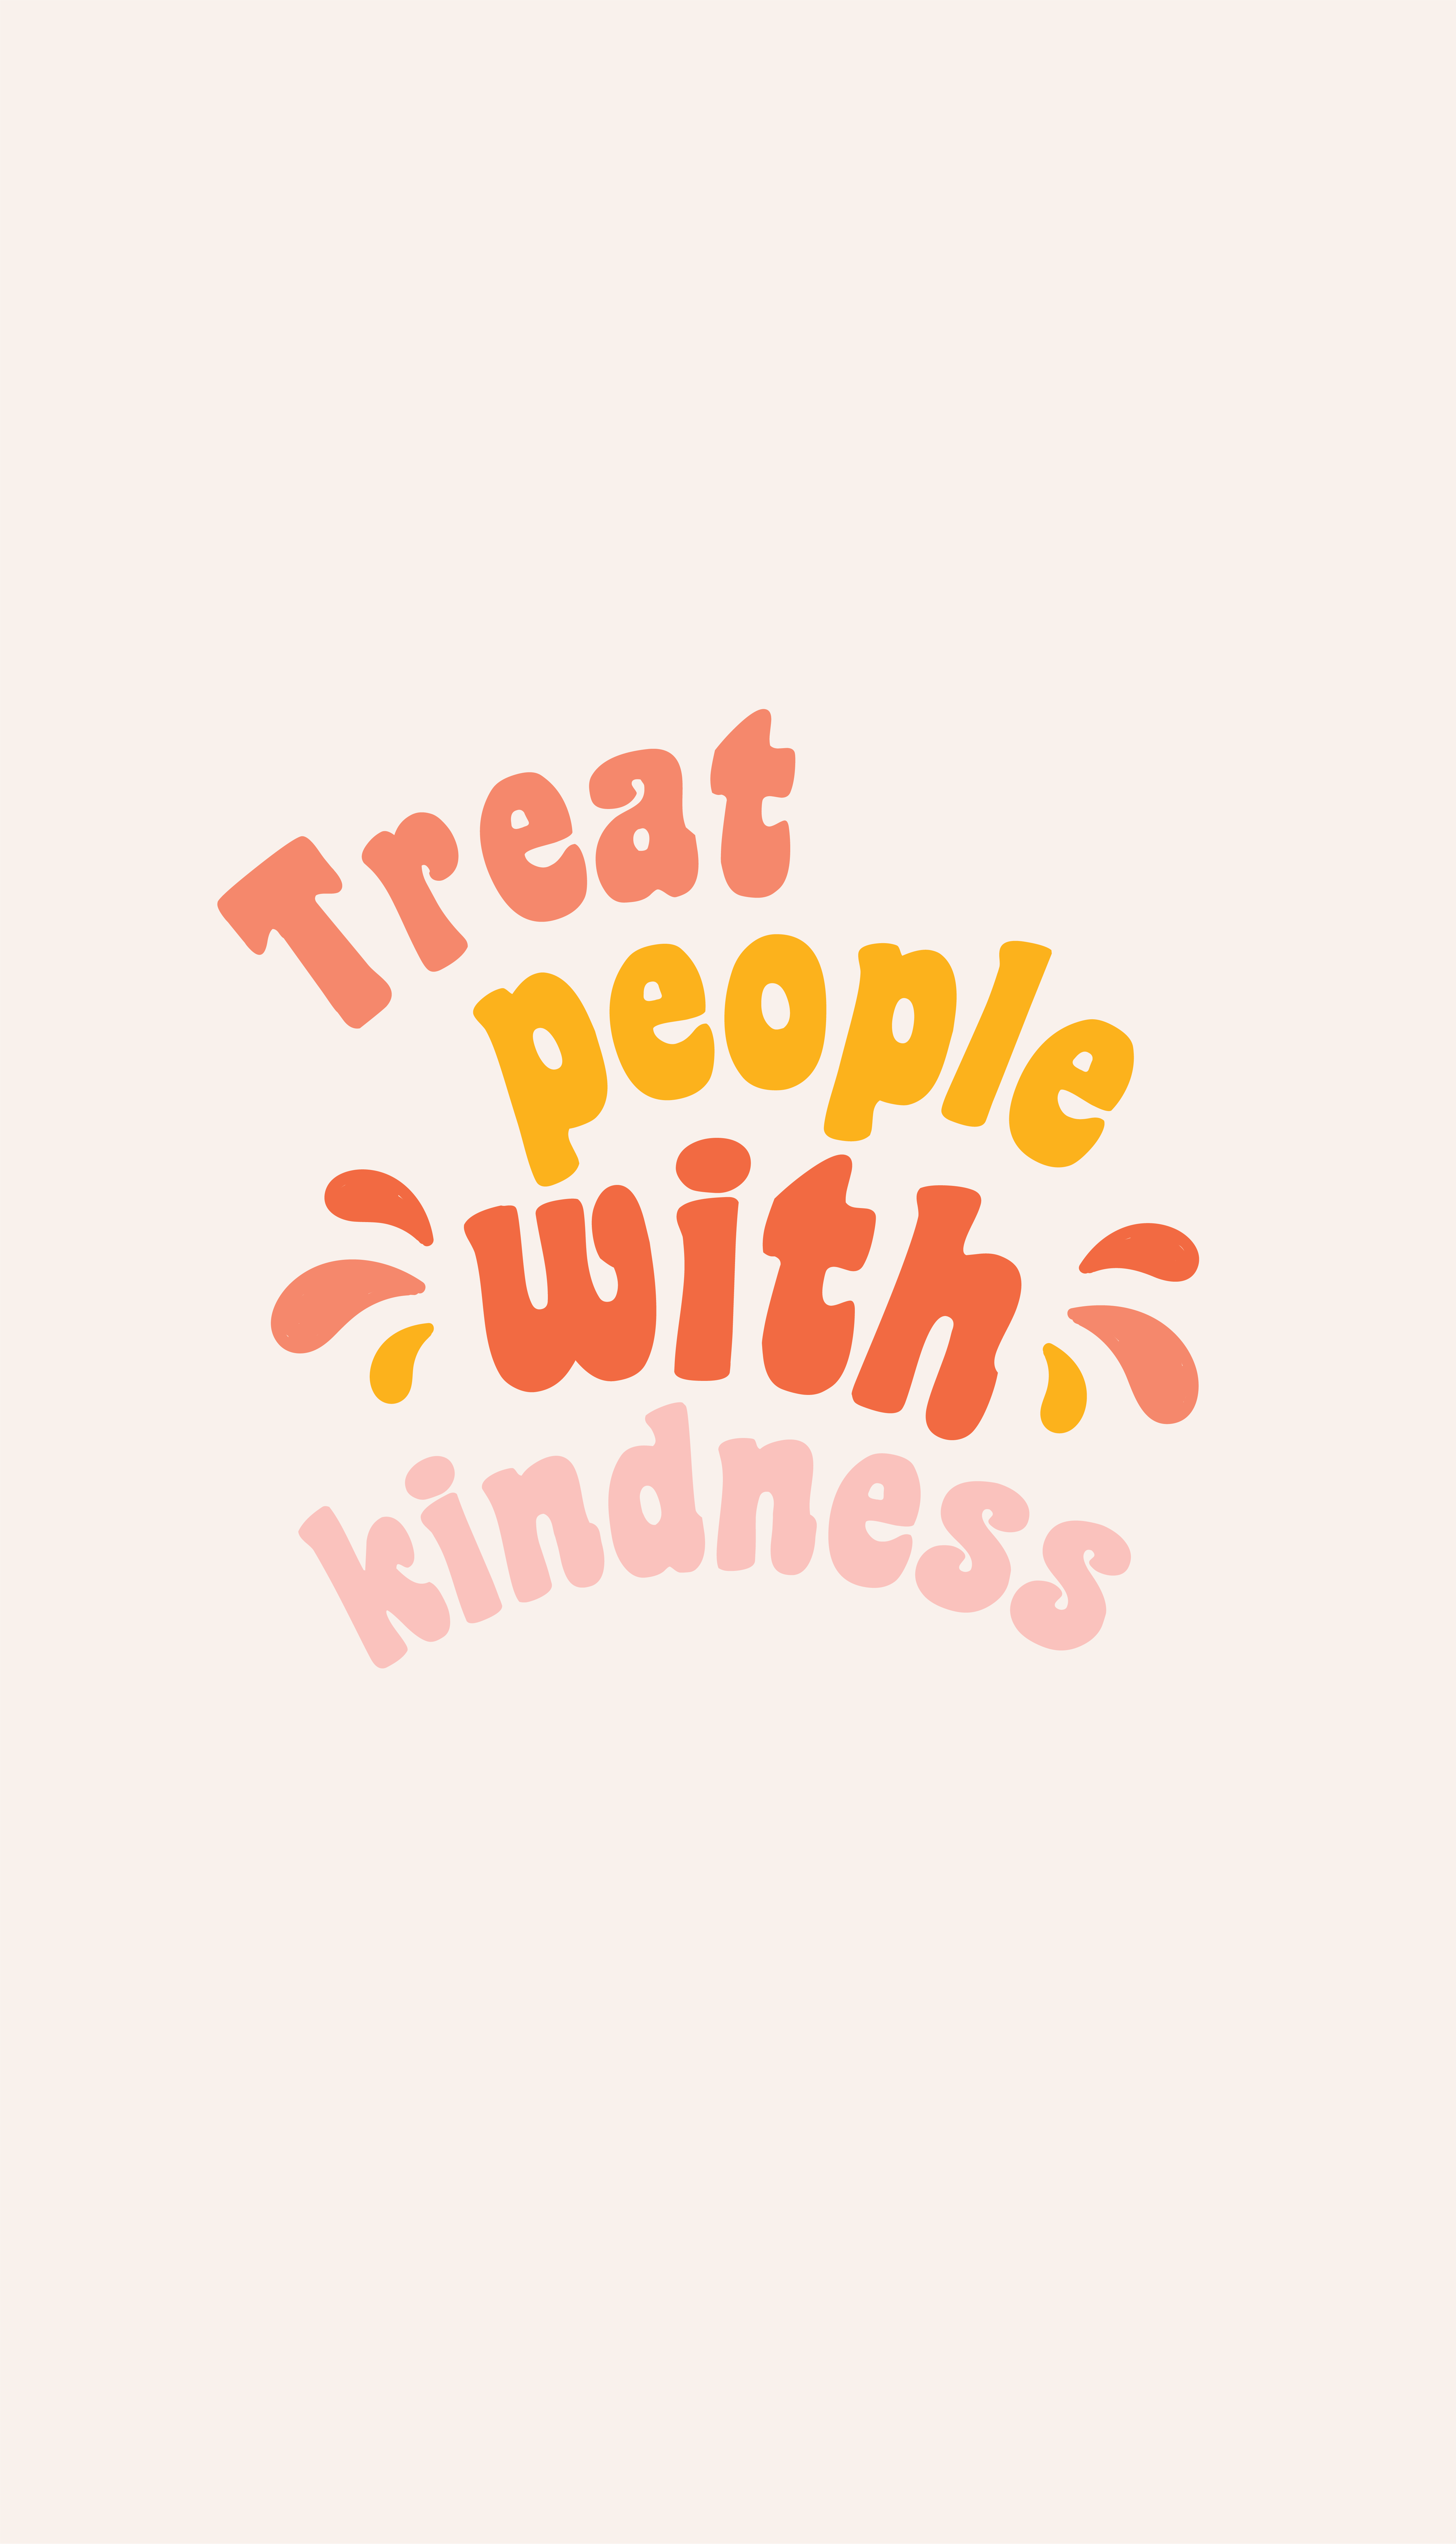 Treat people with kindness. Sticker. Harry styles quotes